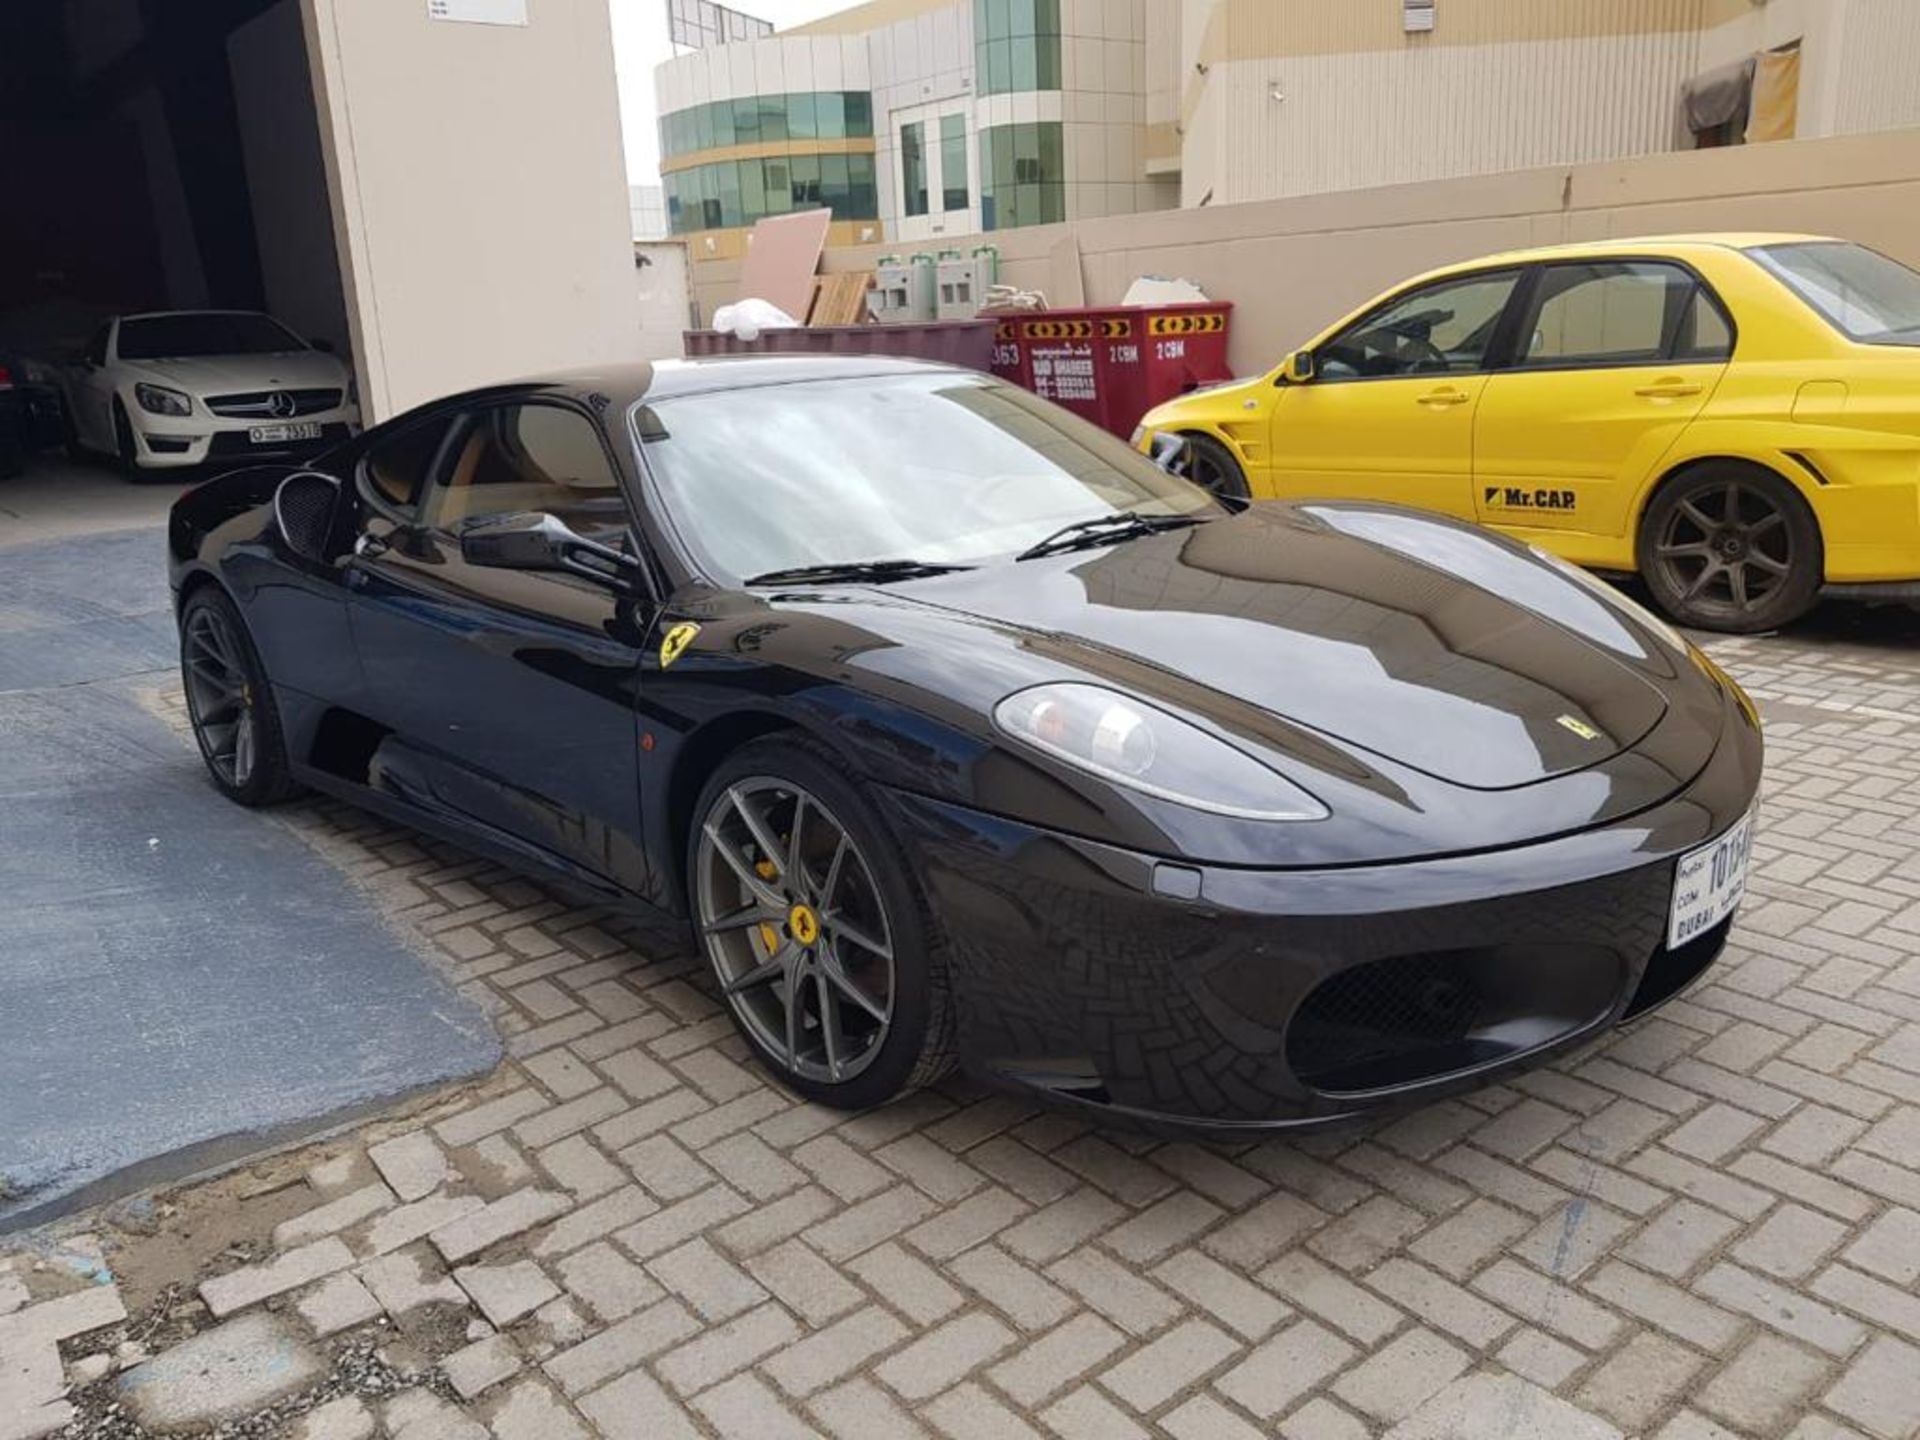 2007 FERRARI F430 BLACK 2 DOOR COUPE 4.3L AUTOMATIC LHD, PERFECT CONDITION INSIDE AND OUT - Image 10 of 13